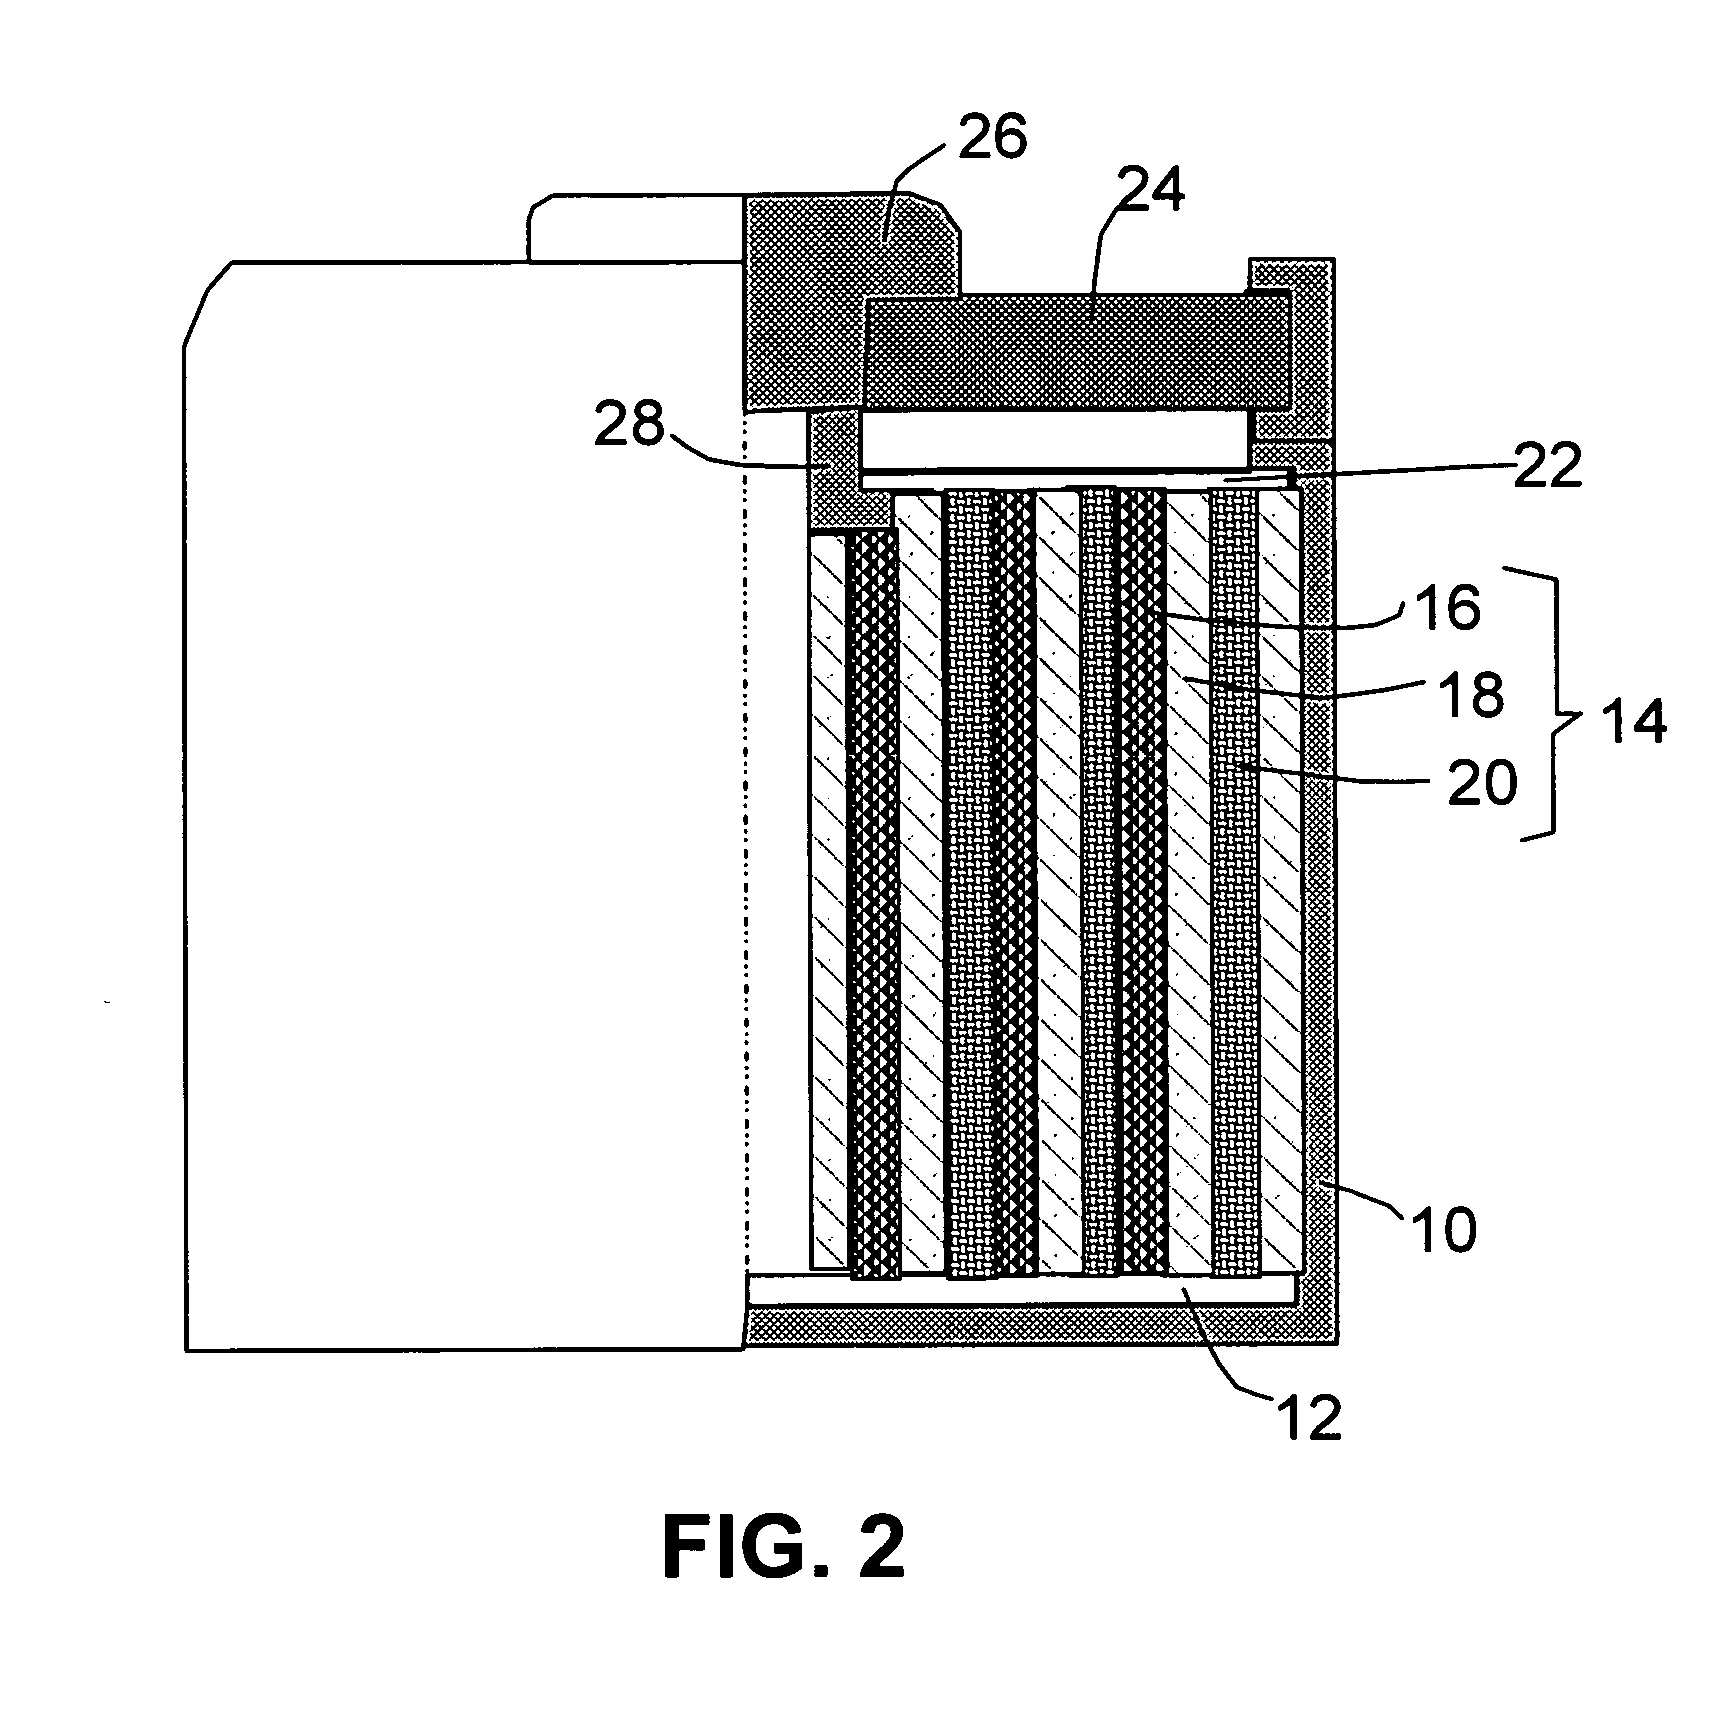 Hybrid nano-filament cathode compositions for lithium metal or lithium ion batteries